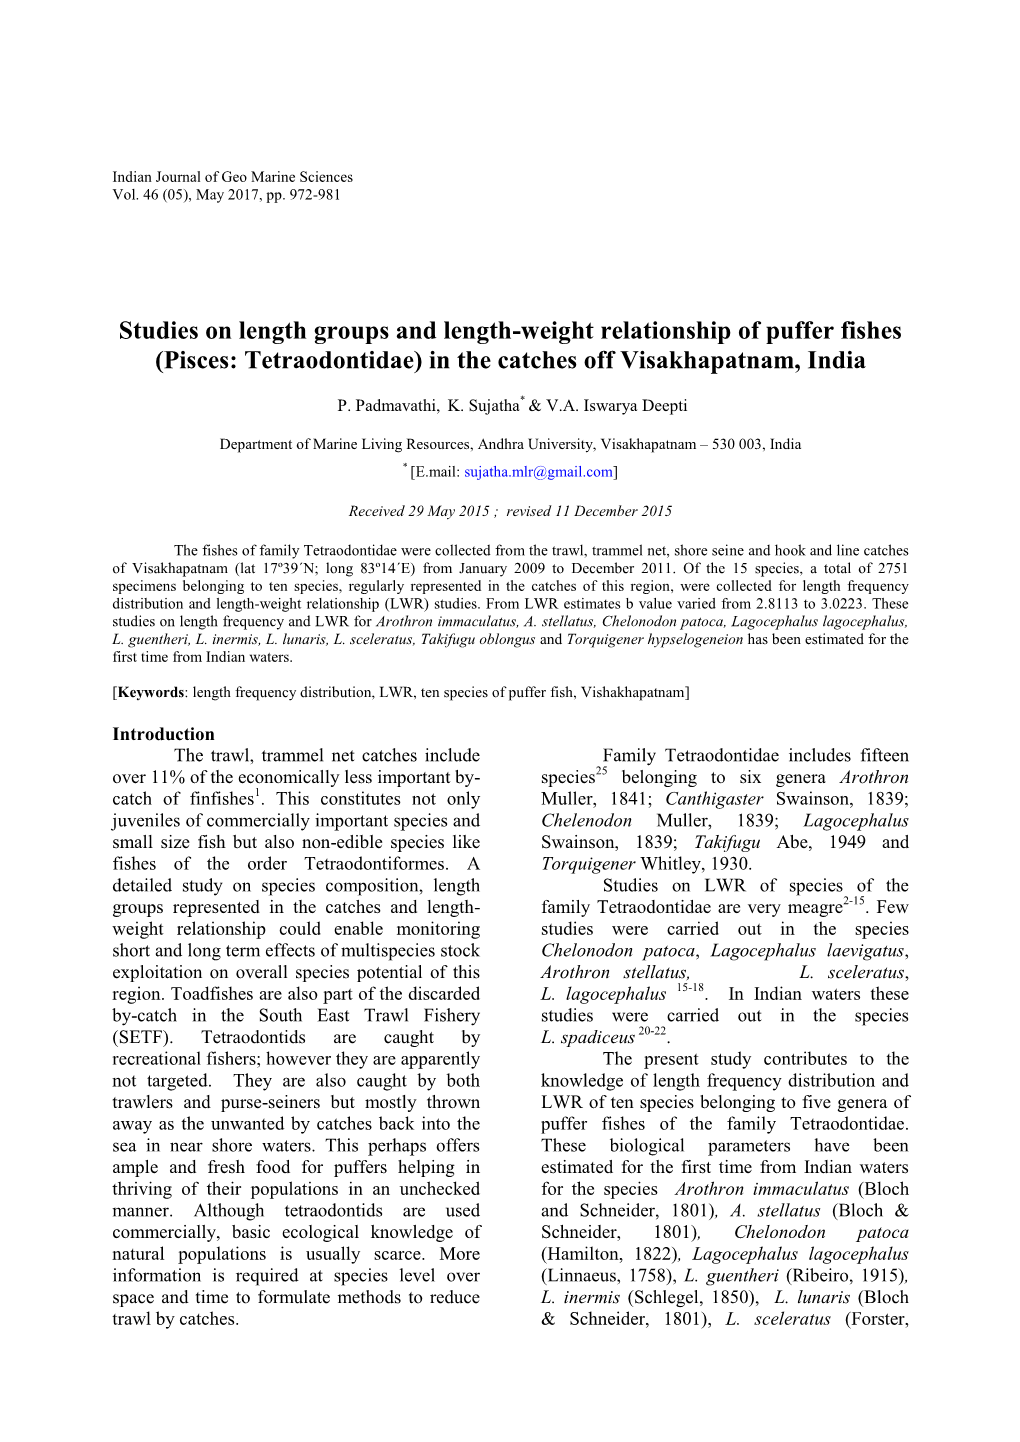 Studies on Length Groups and Length-Weight Relationship of Puffer Fishes (Pisces: Tetraodontidae) in the Catches Off Visakhapatnam, India